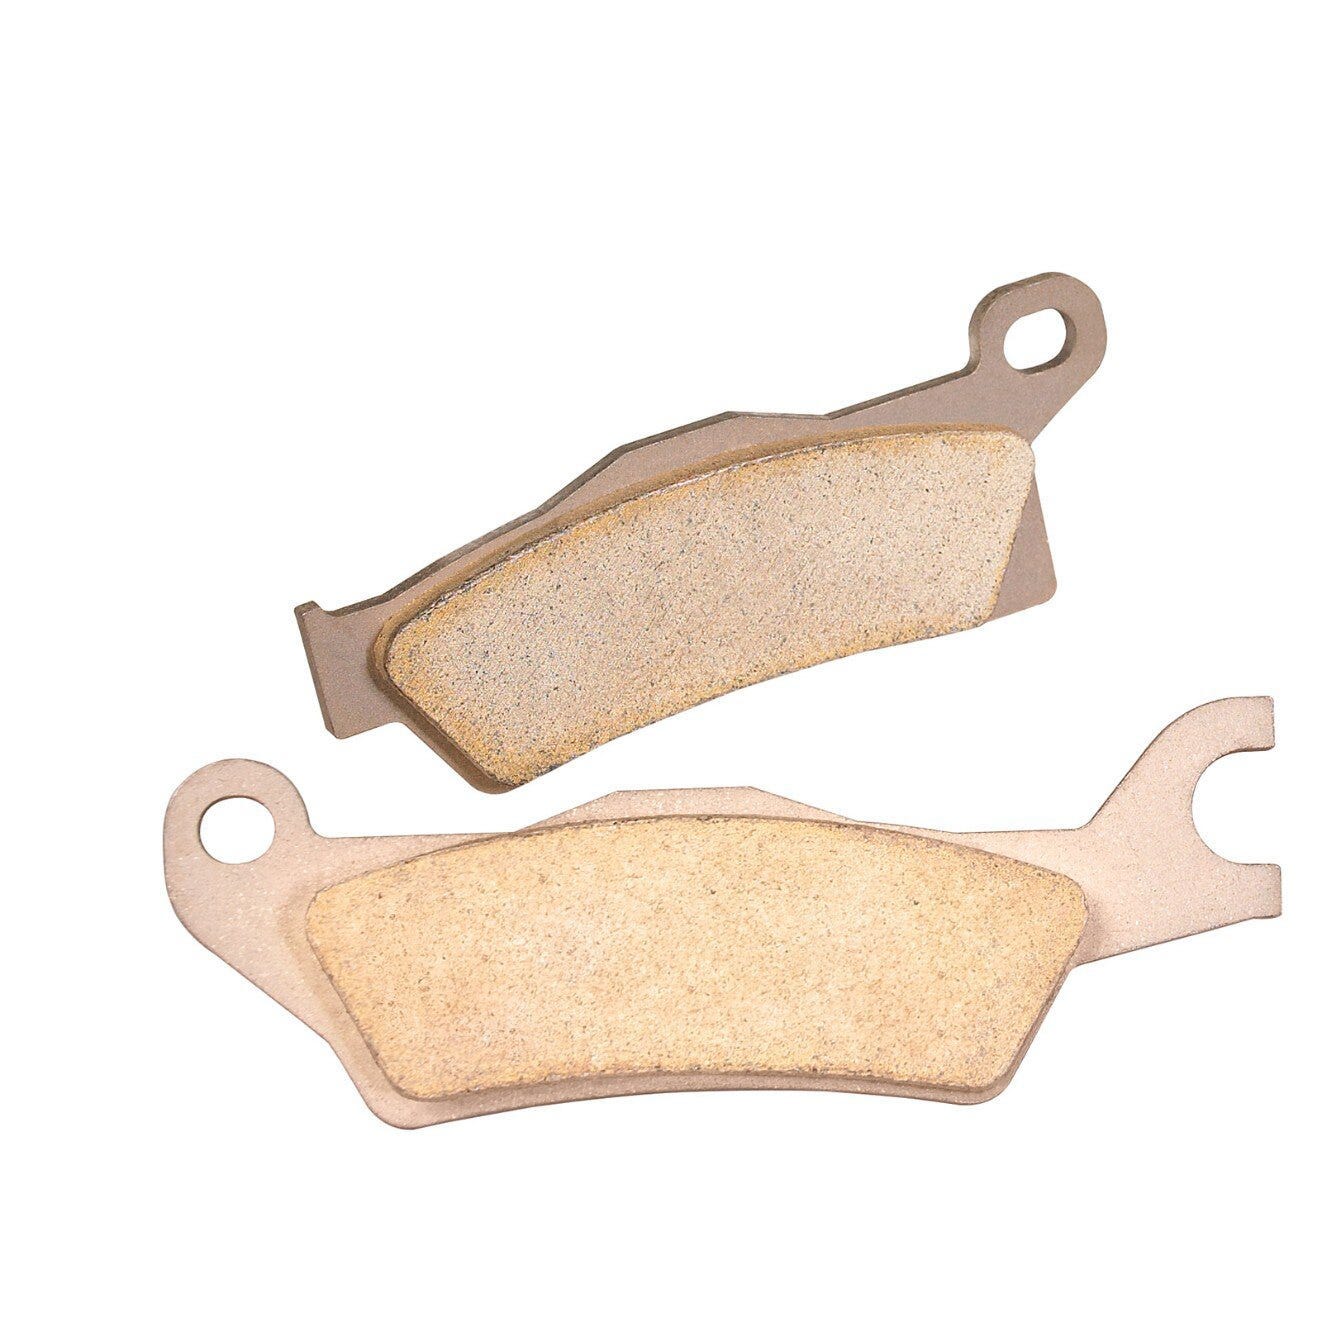 Can-am Metallic Brake Pad Kit - Rear Right 715900387 - The Parts Lodge